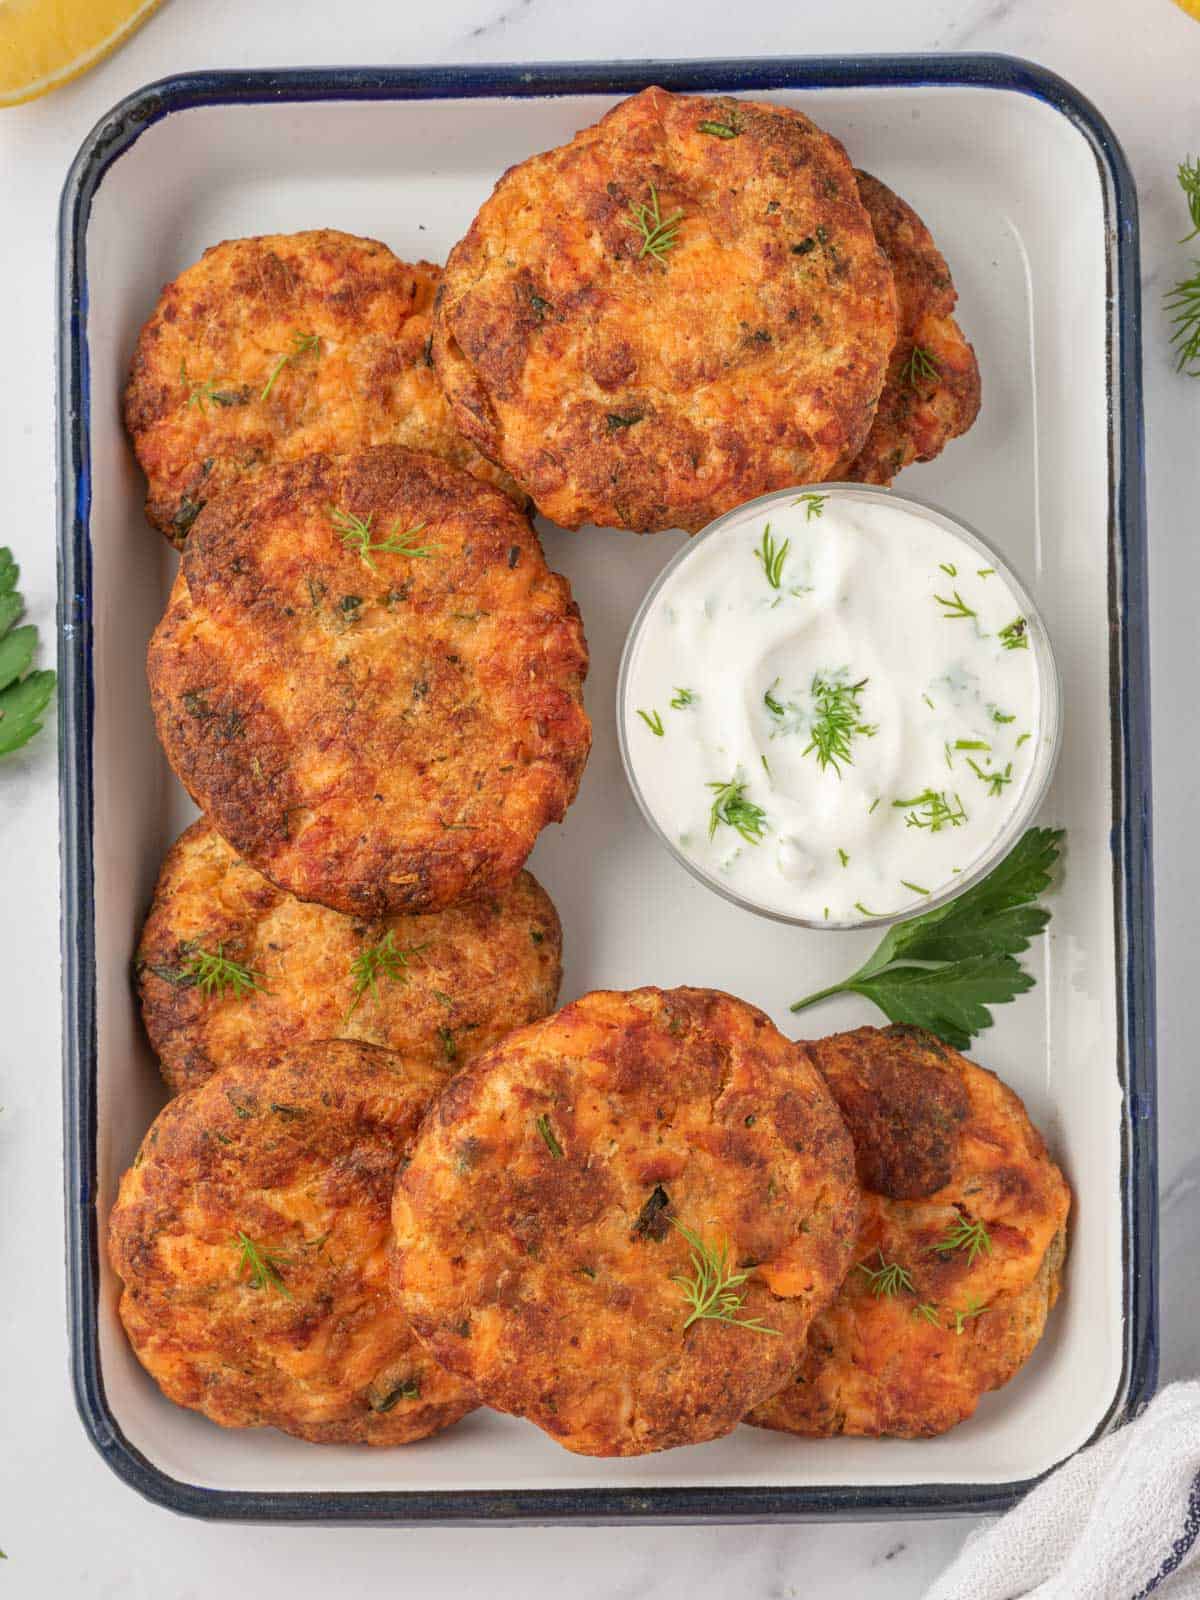 Fresh salmon patties recipe on a tray for serving.